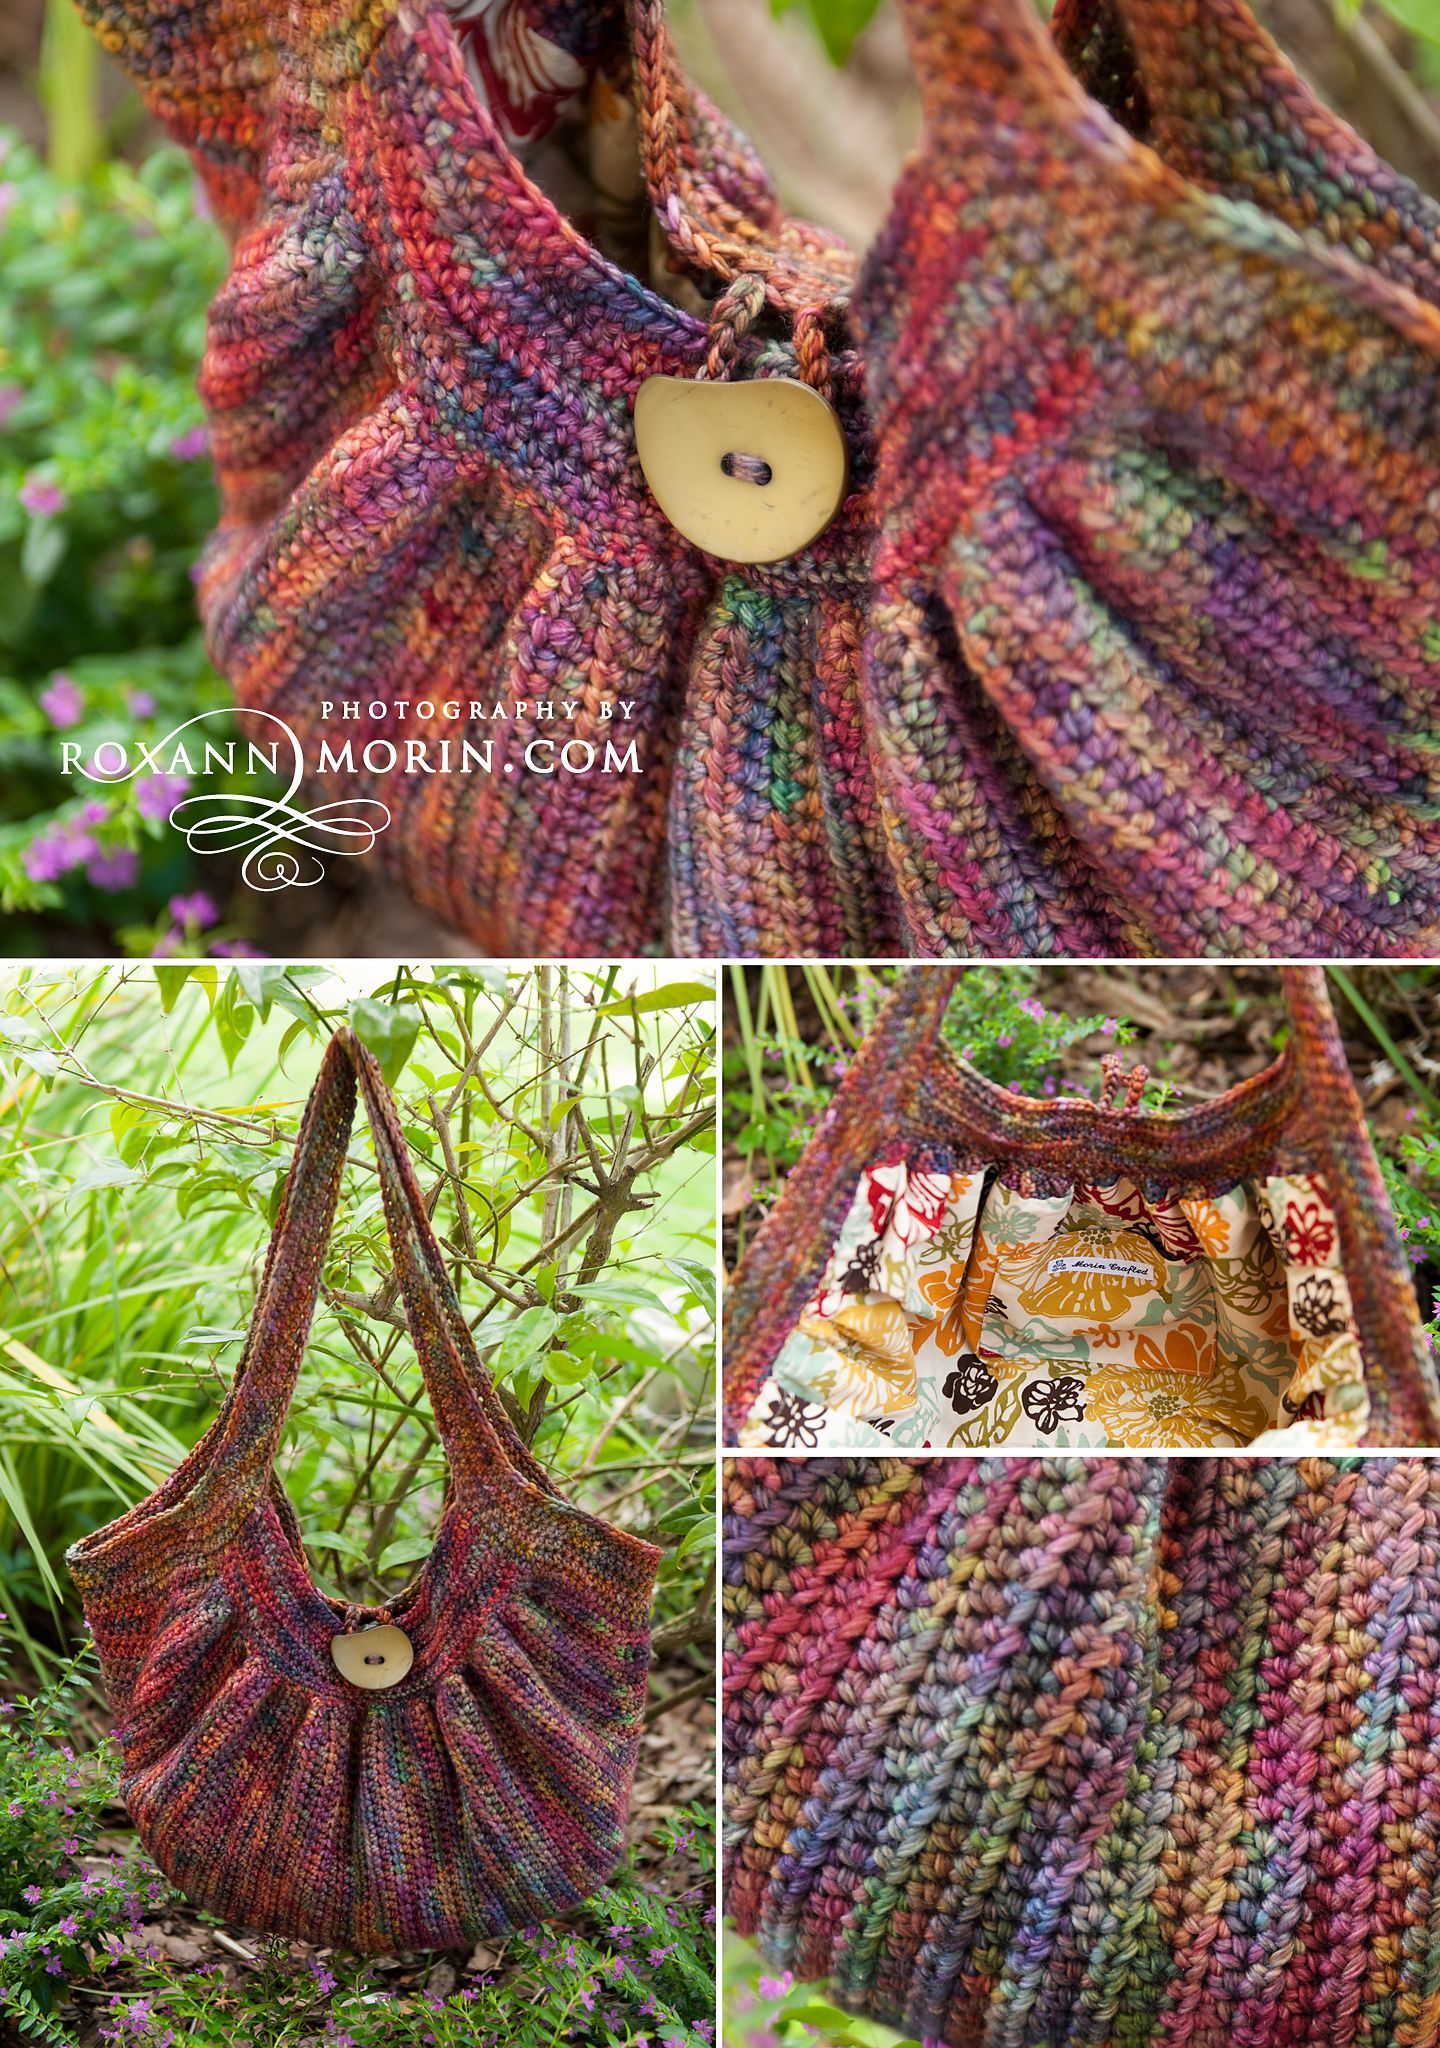 Crochet purse “The Fat Bag”. I LOVE this pattern for a bag. I just followed the chart and added stitches f